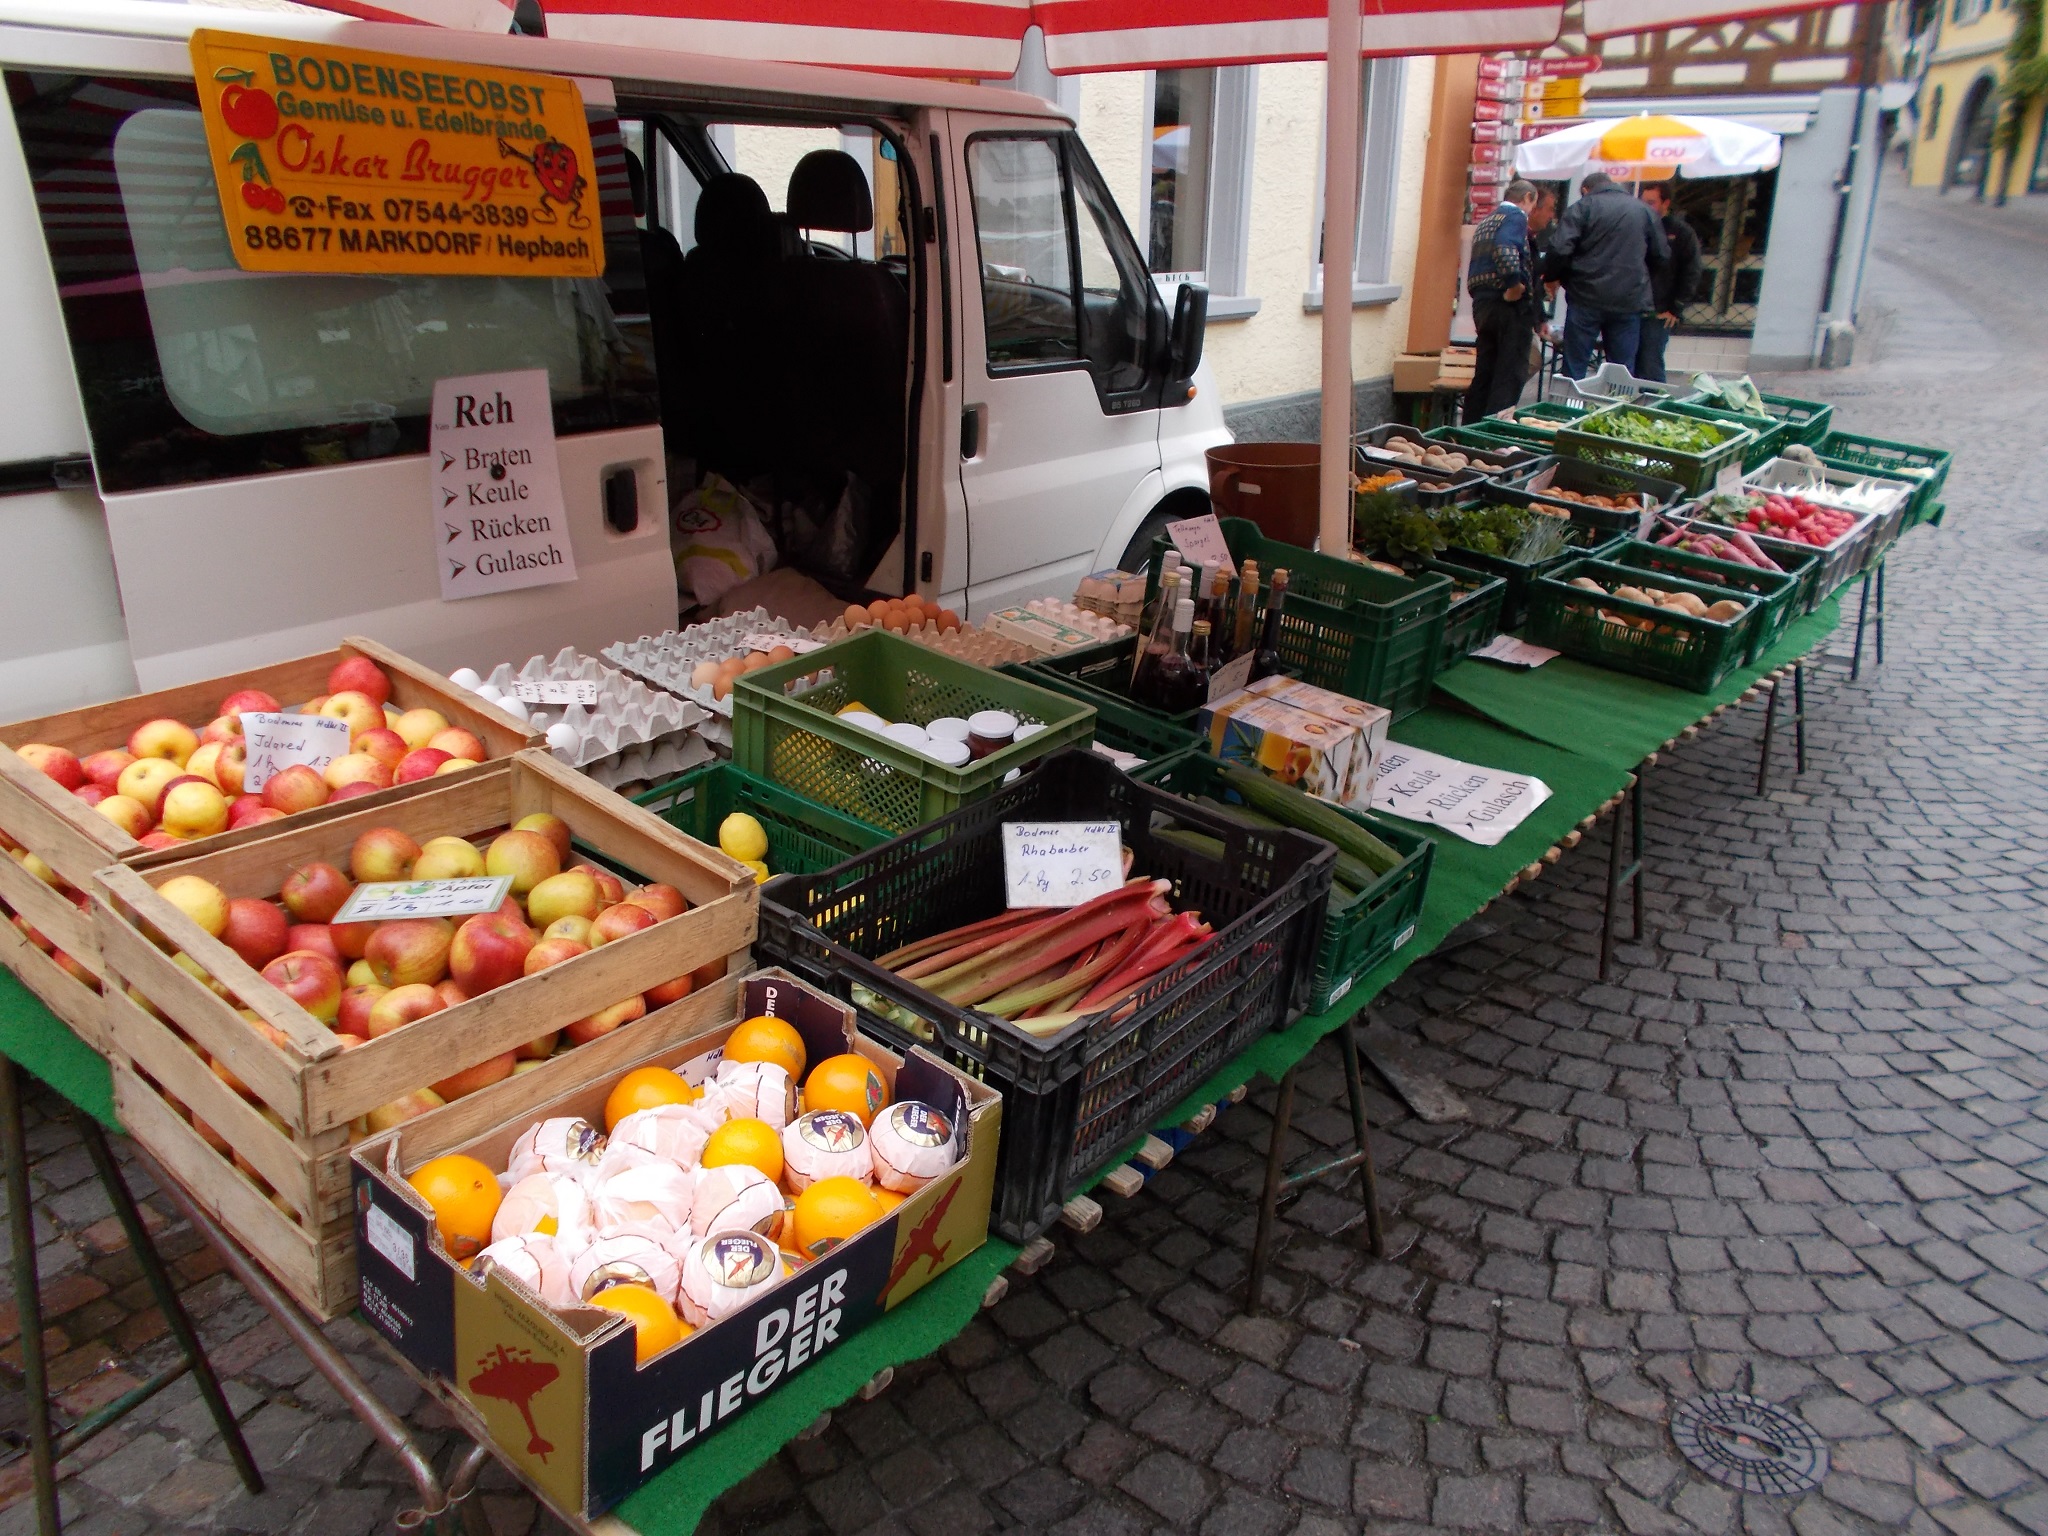 A van with a wide array of fruit, eggs, and vegetables laid out for market in Meersburg, Germany.